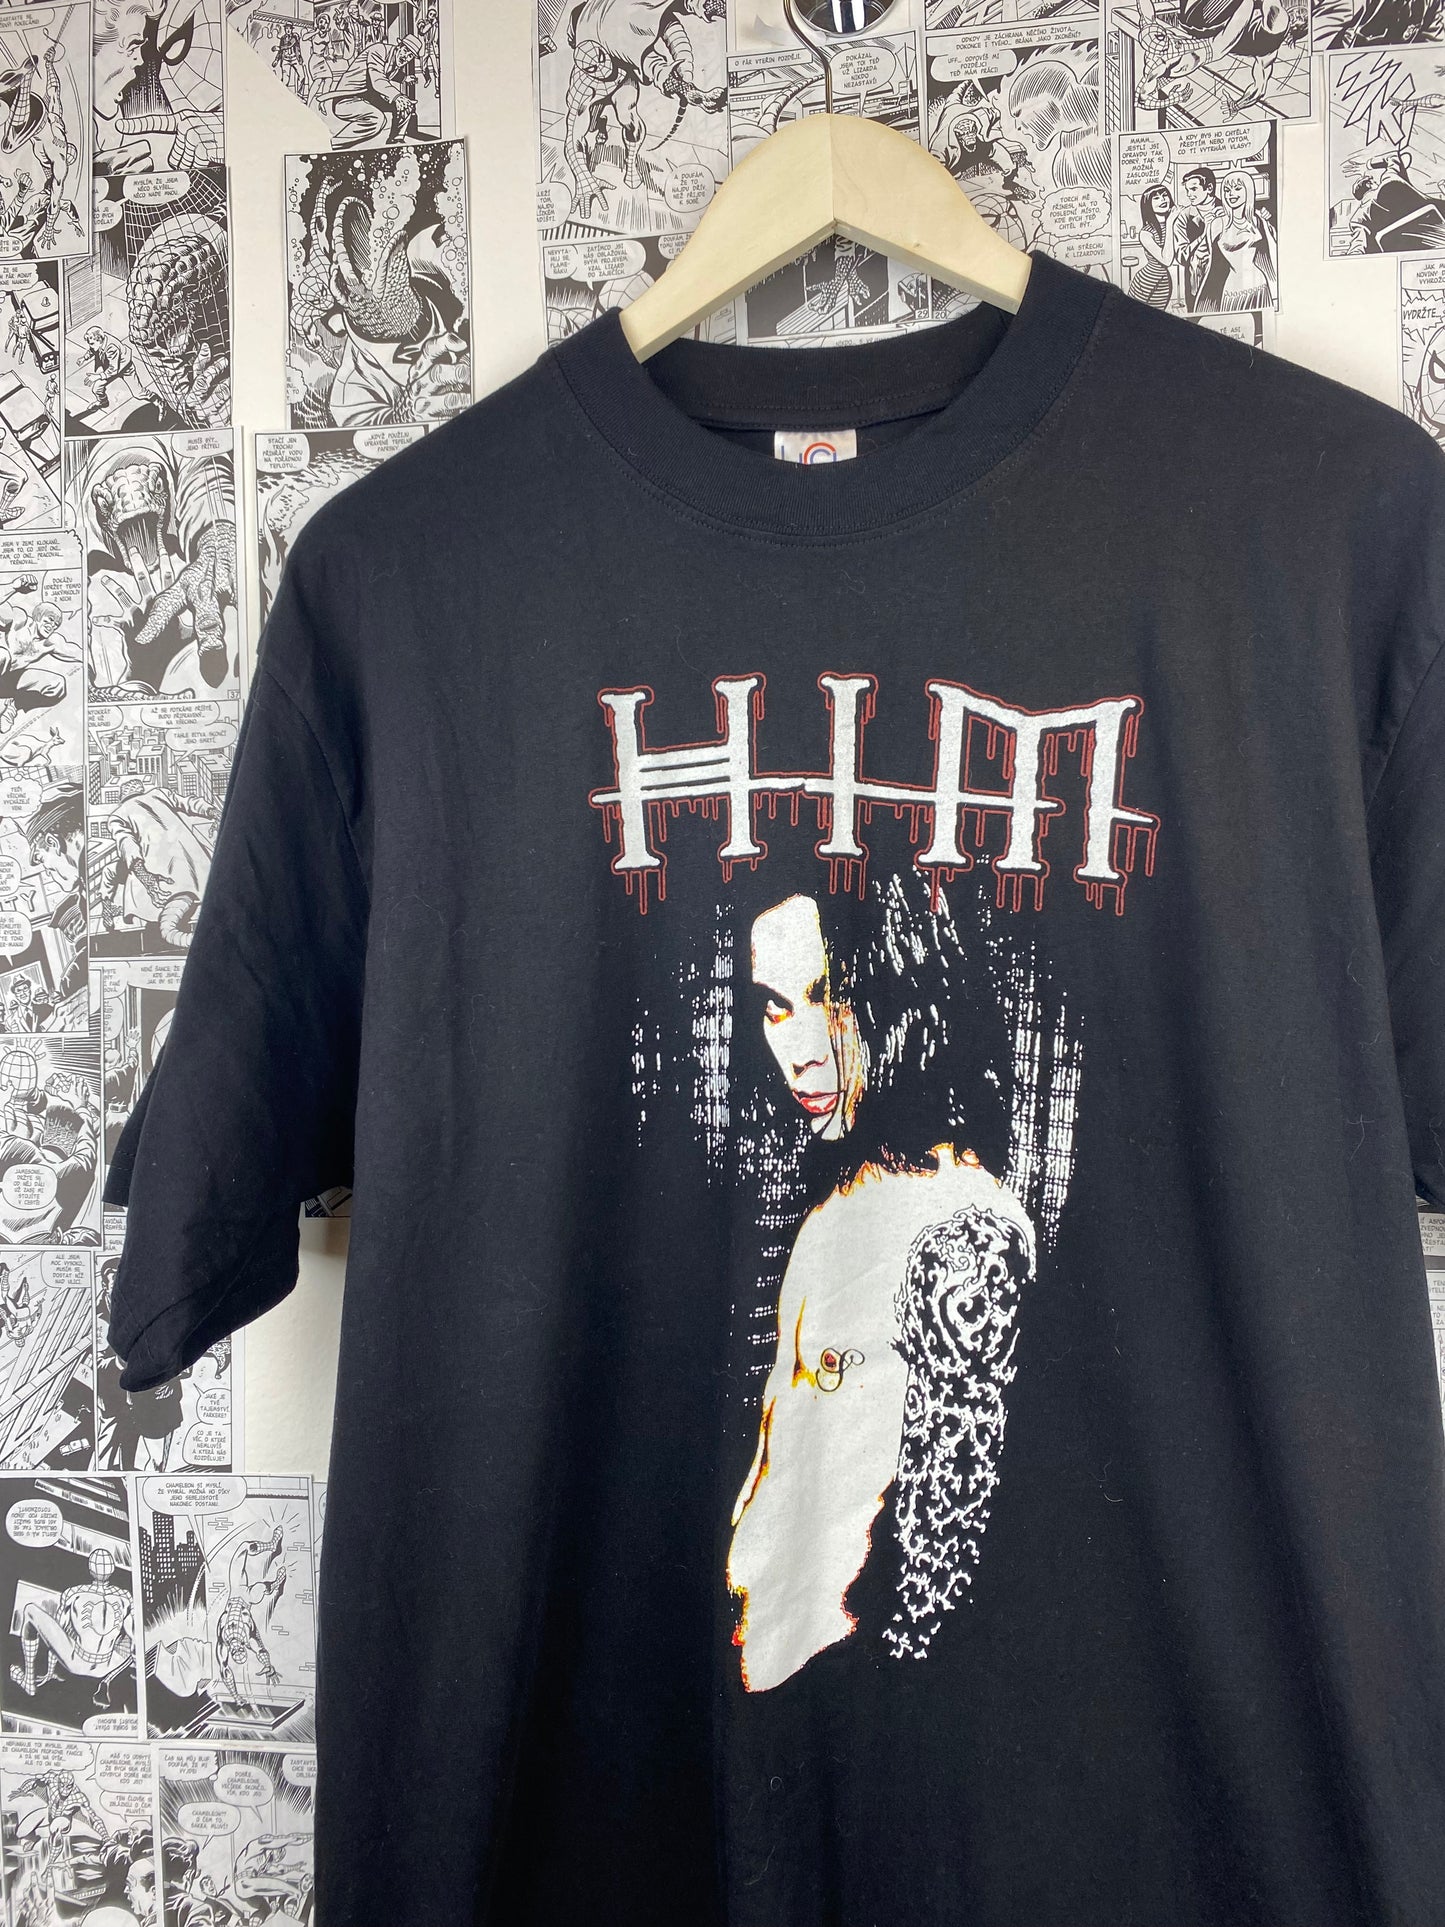 Copy of Vintage HIM “Wicked Game” t-shirt - size XL